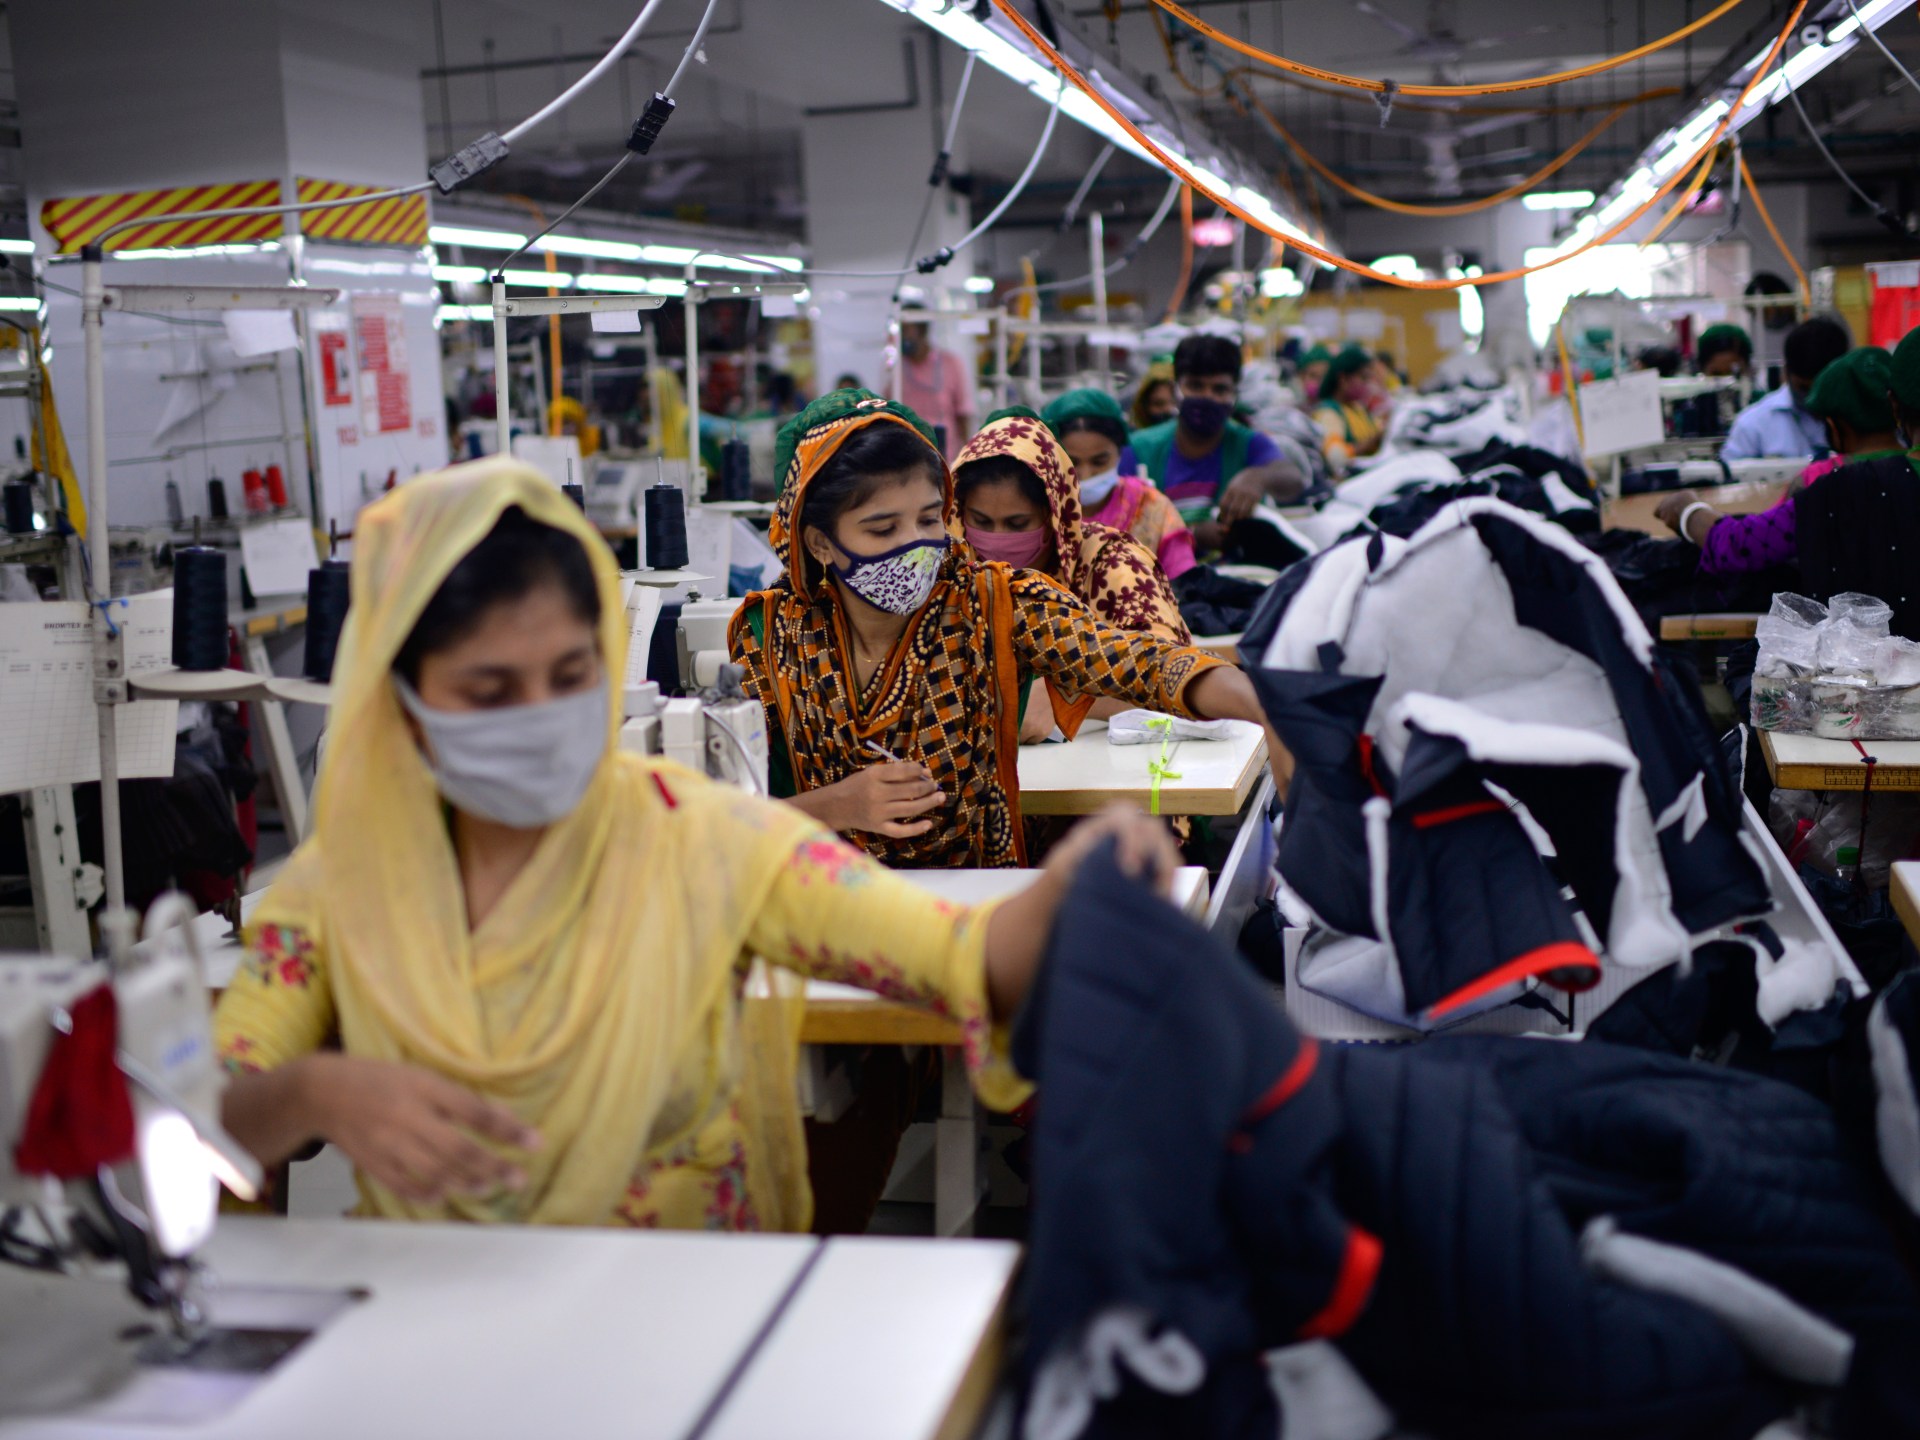 Global fashion brands exploiting Bangladesh workers: Study | Fashion Industry News